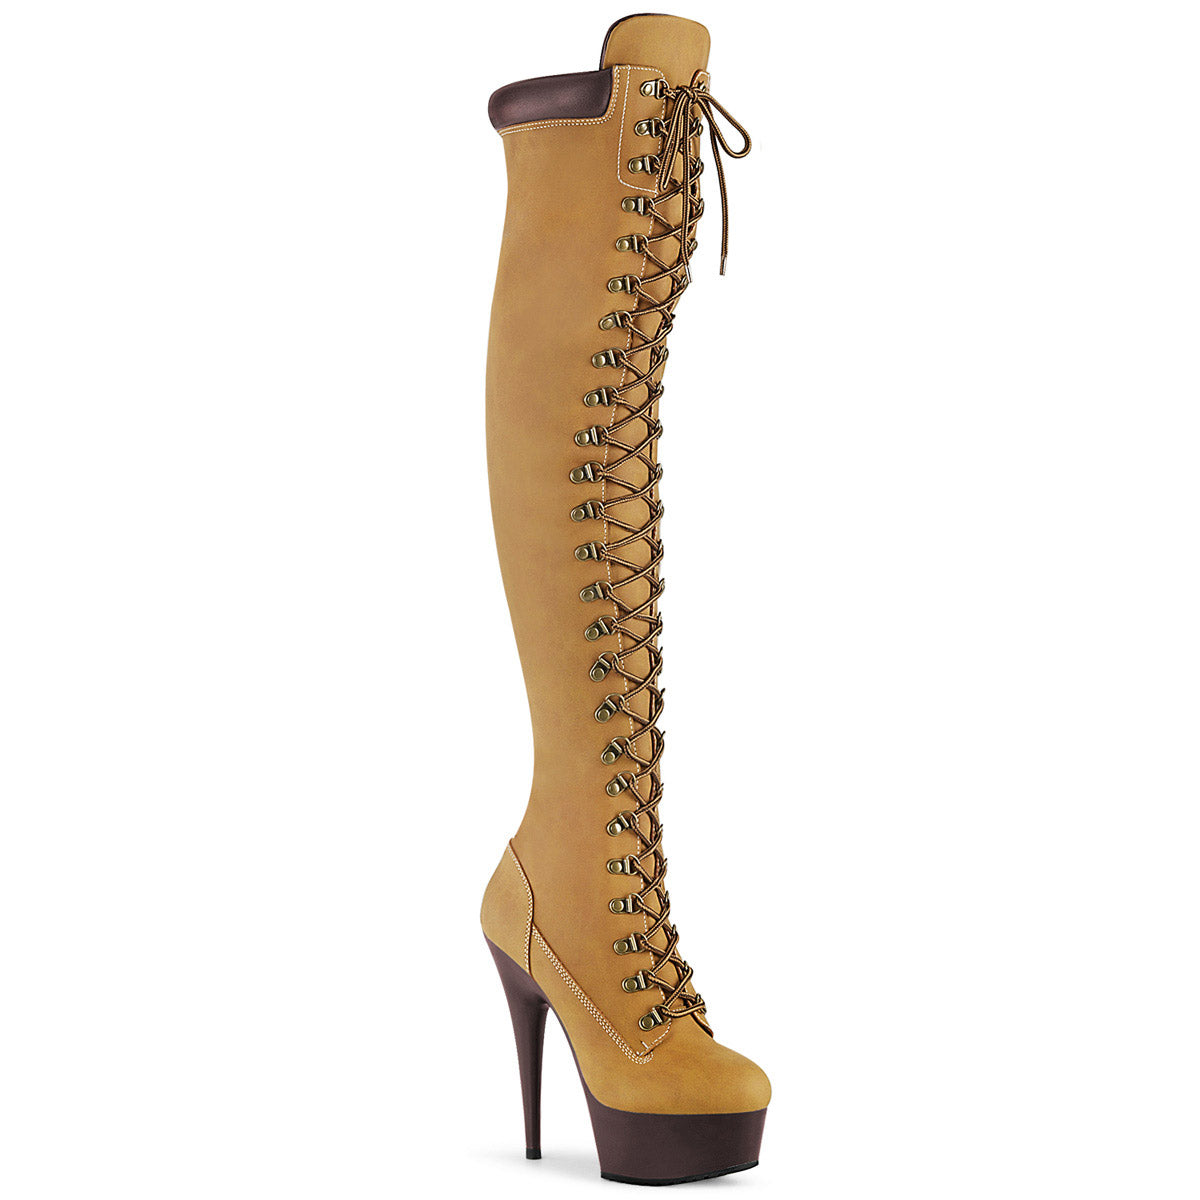 6" Heel, 1 3/4" PF Lace-Up Front Thigh High Boot, Side Zip Pleaser Pleaser DELIGHT/3000TL